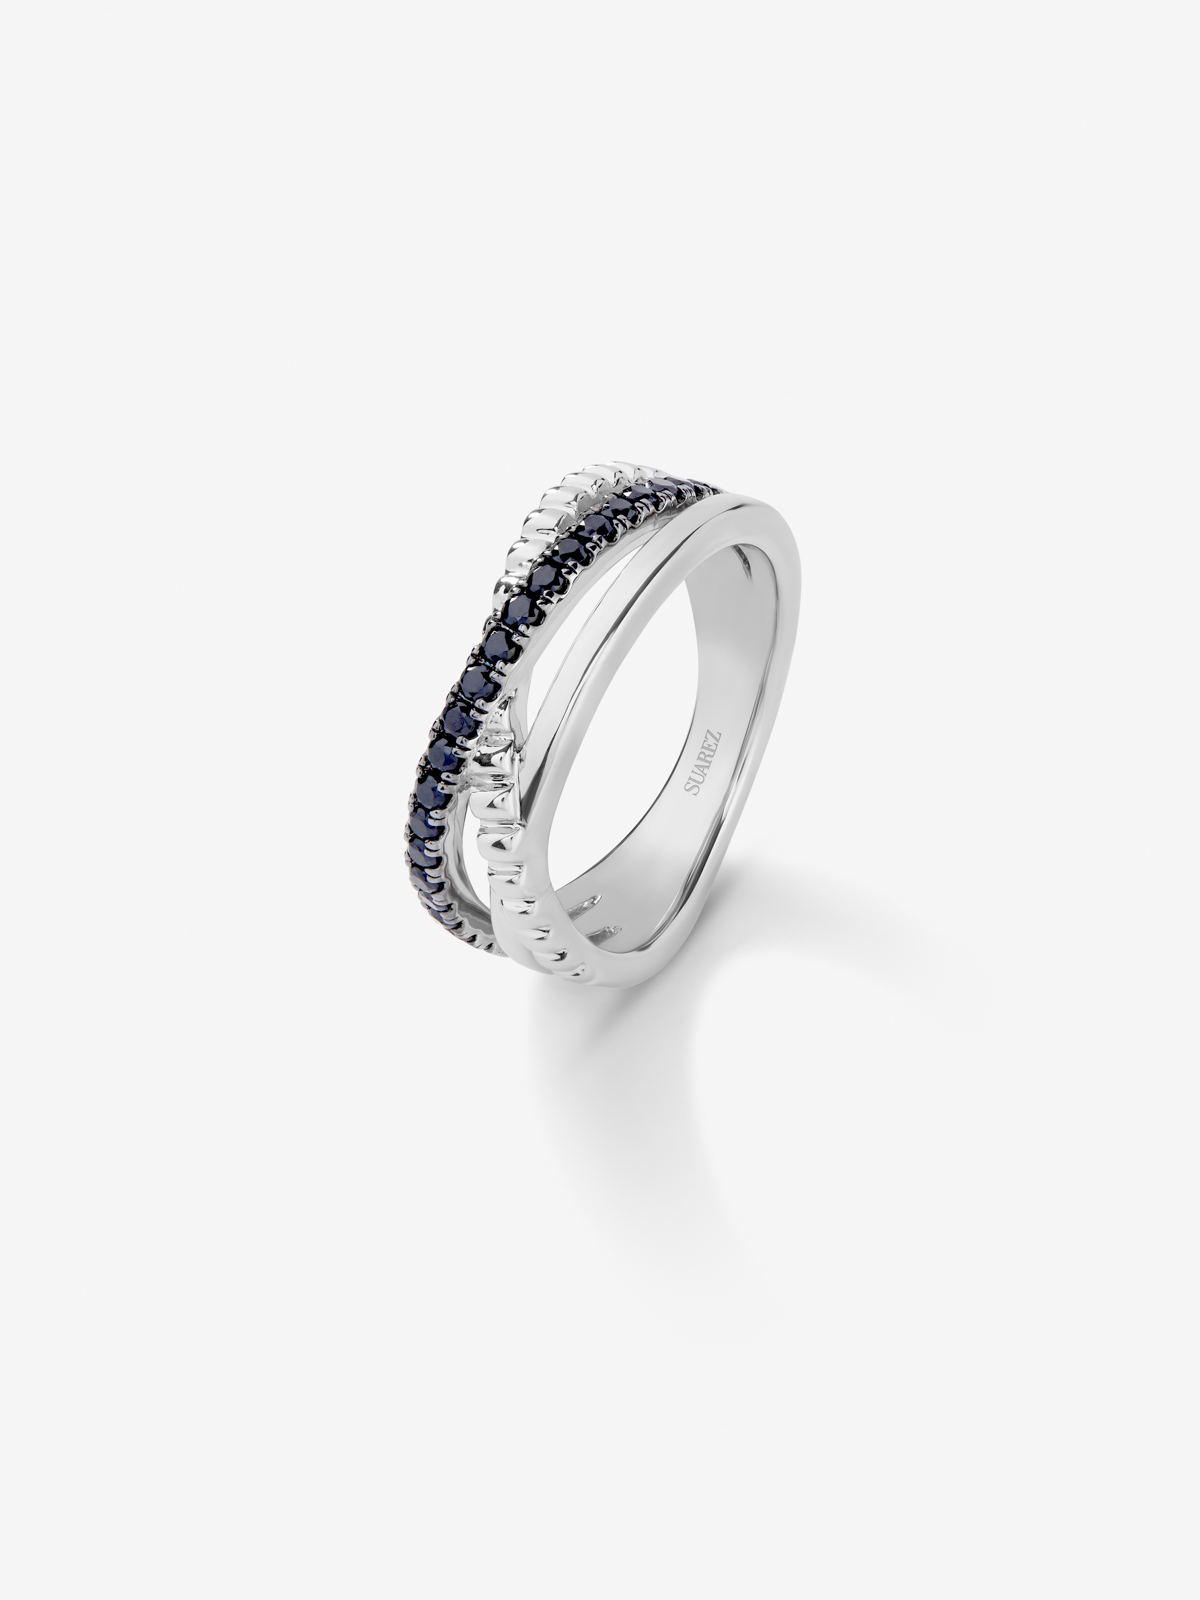 Triple-arm 925 silver ring with spinels